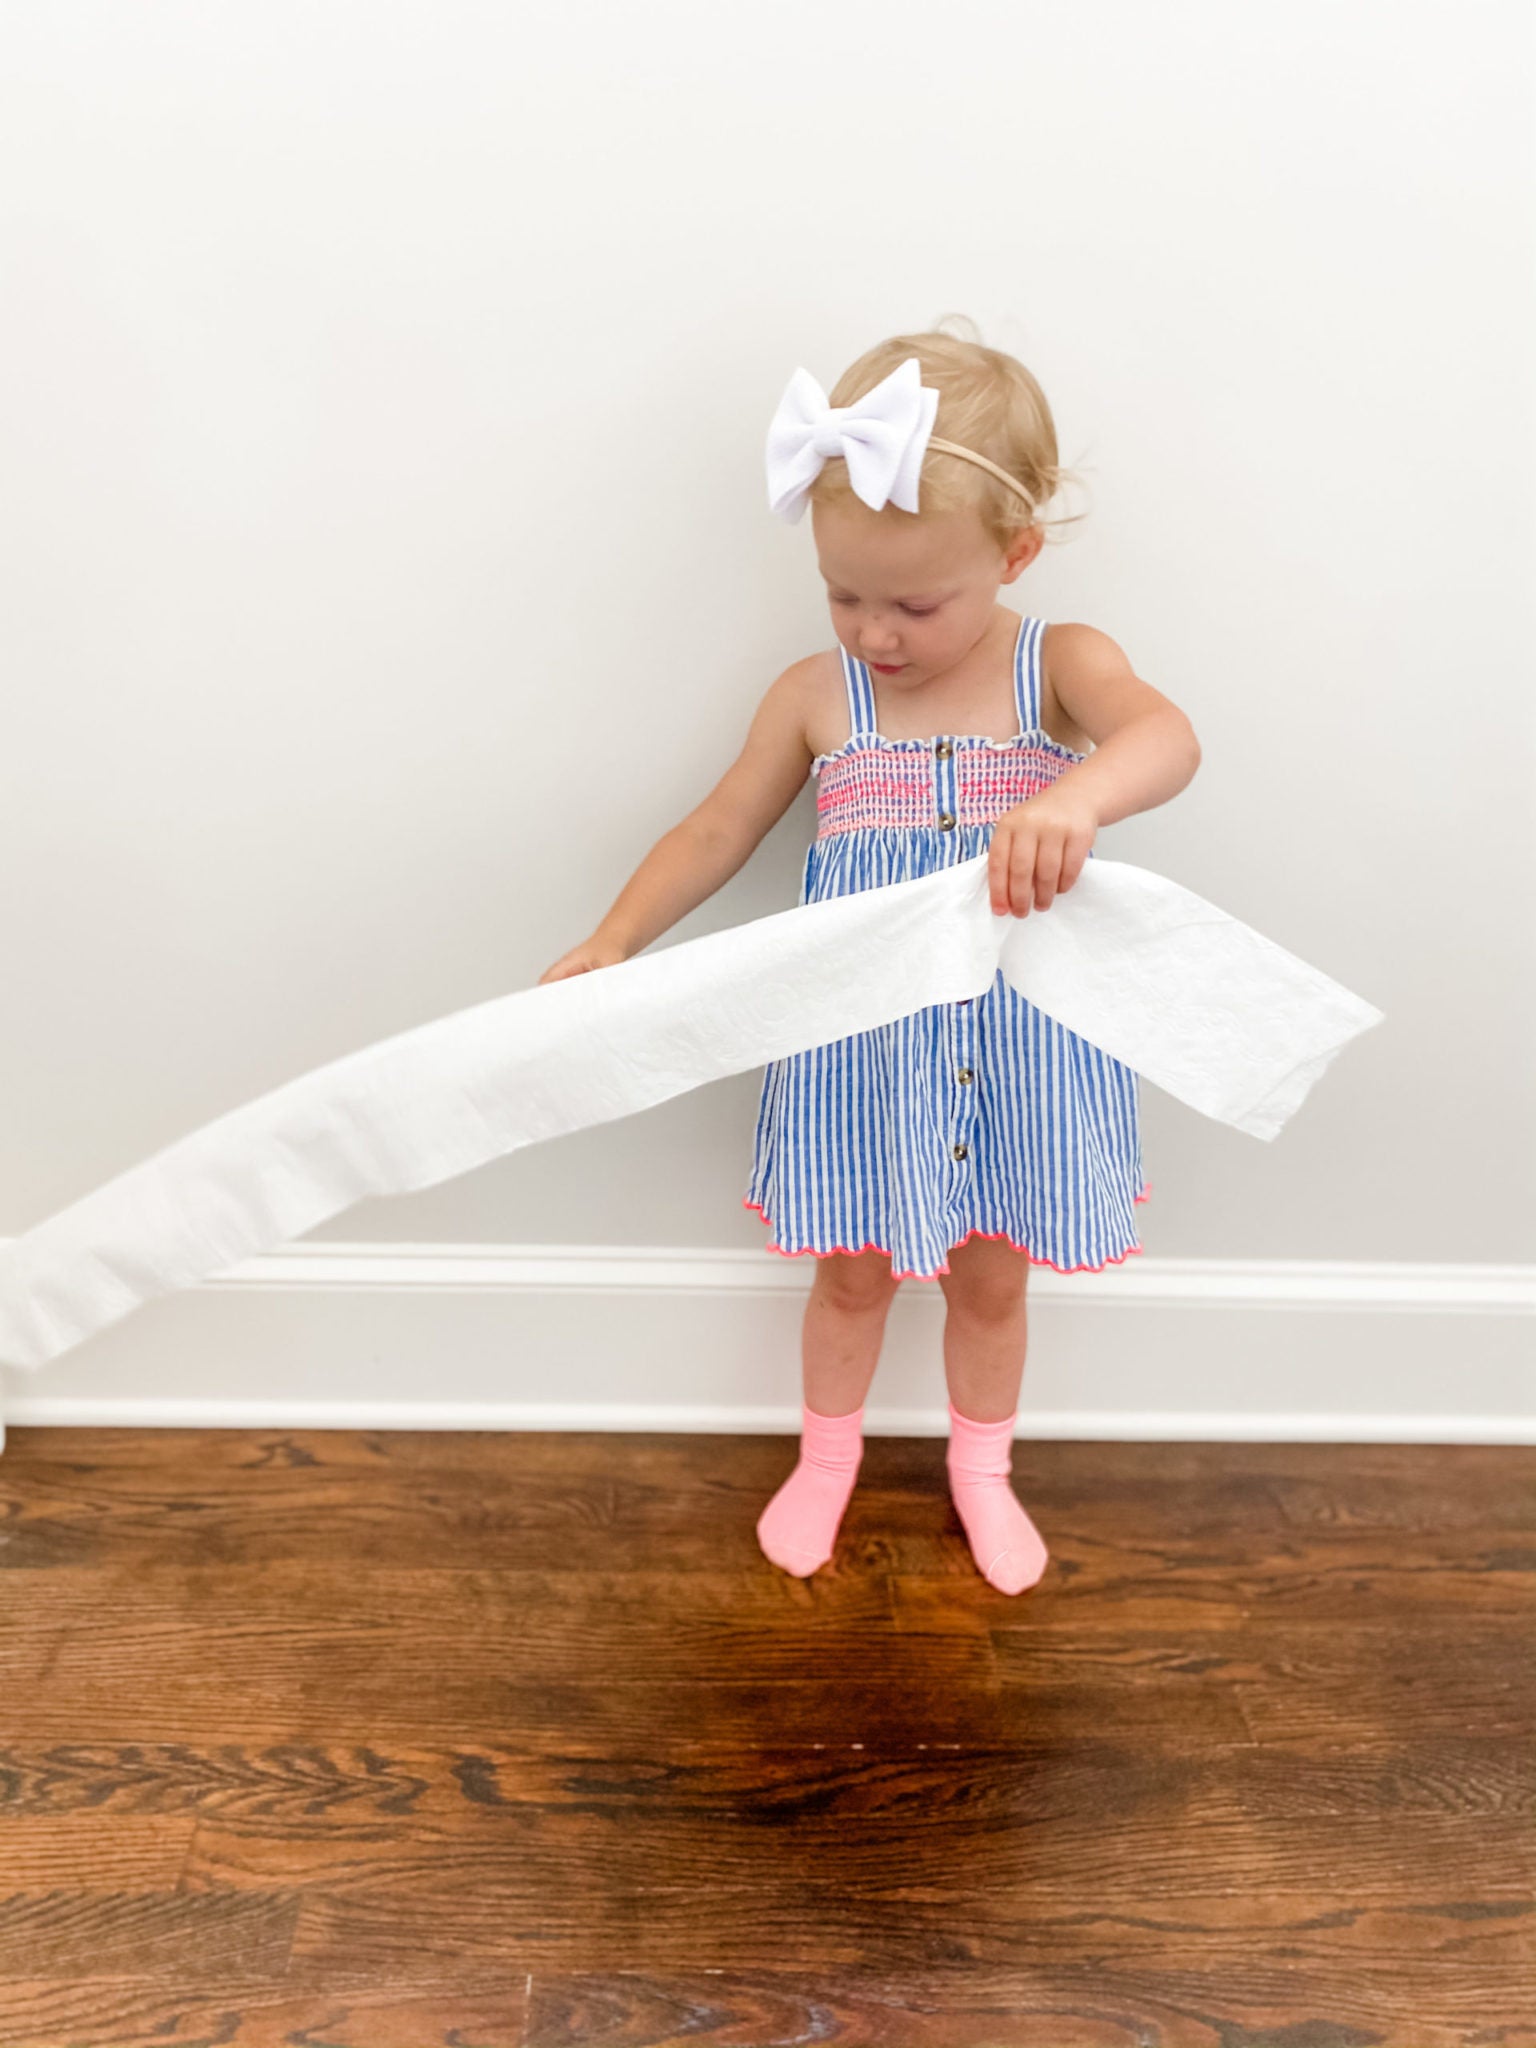 How to Dress a Potty Training Toddler